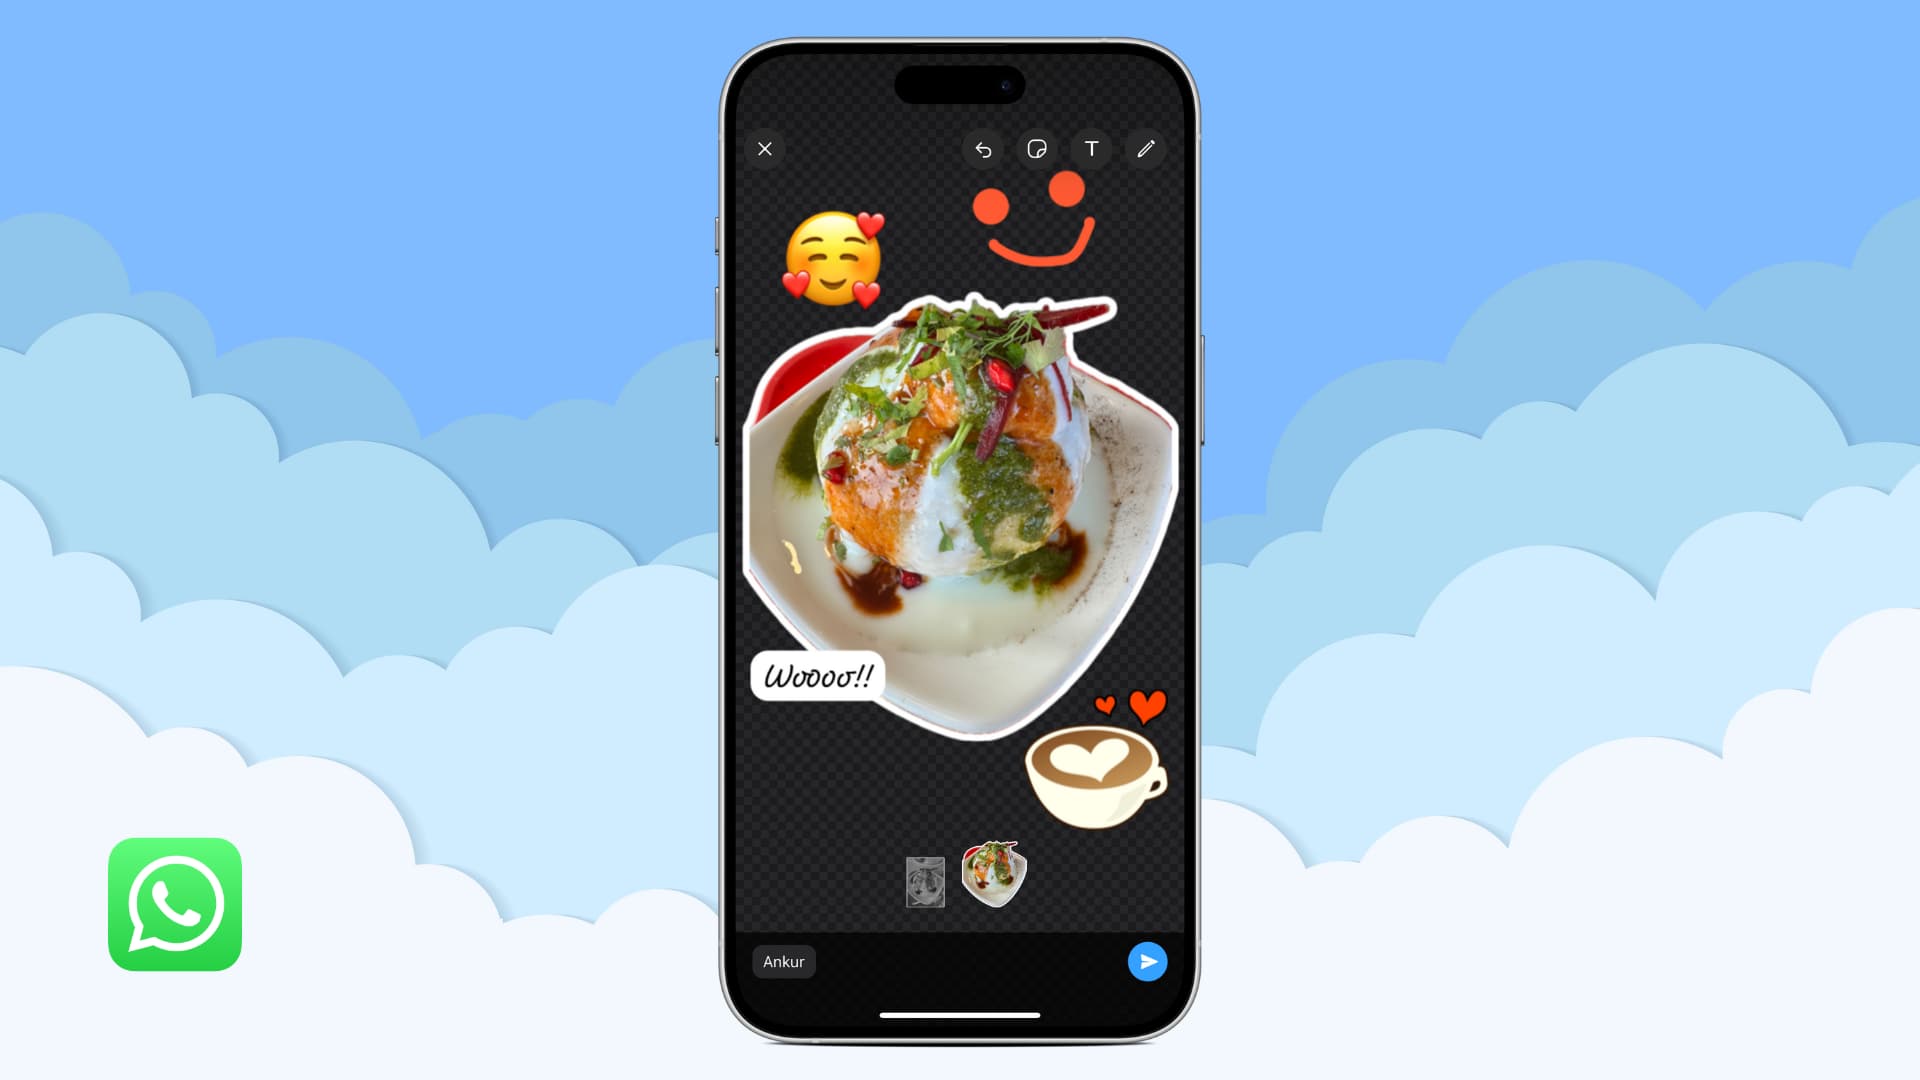 Creating a sticker in WhatsApp on iPhone